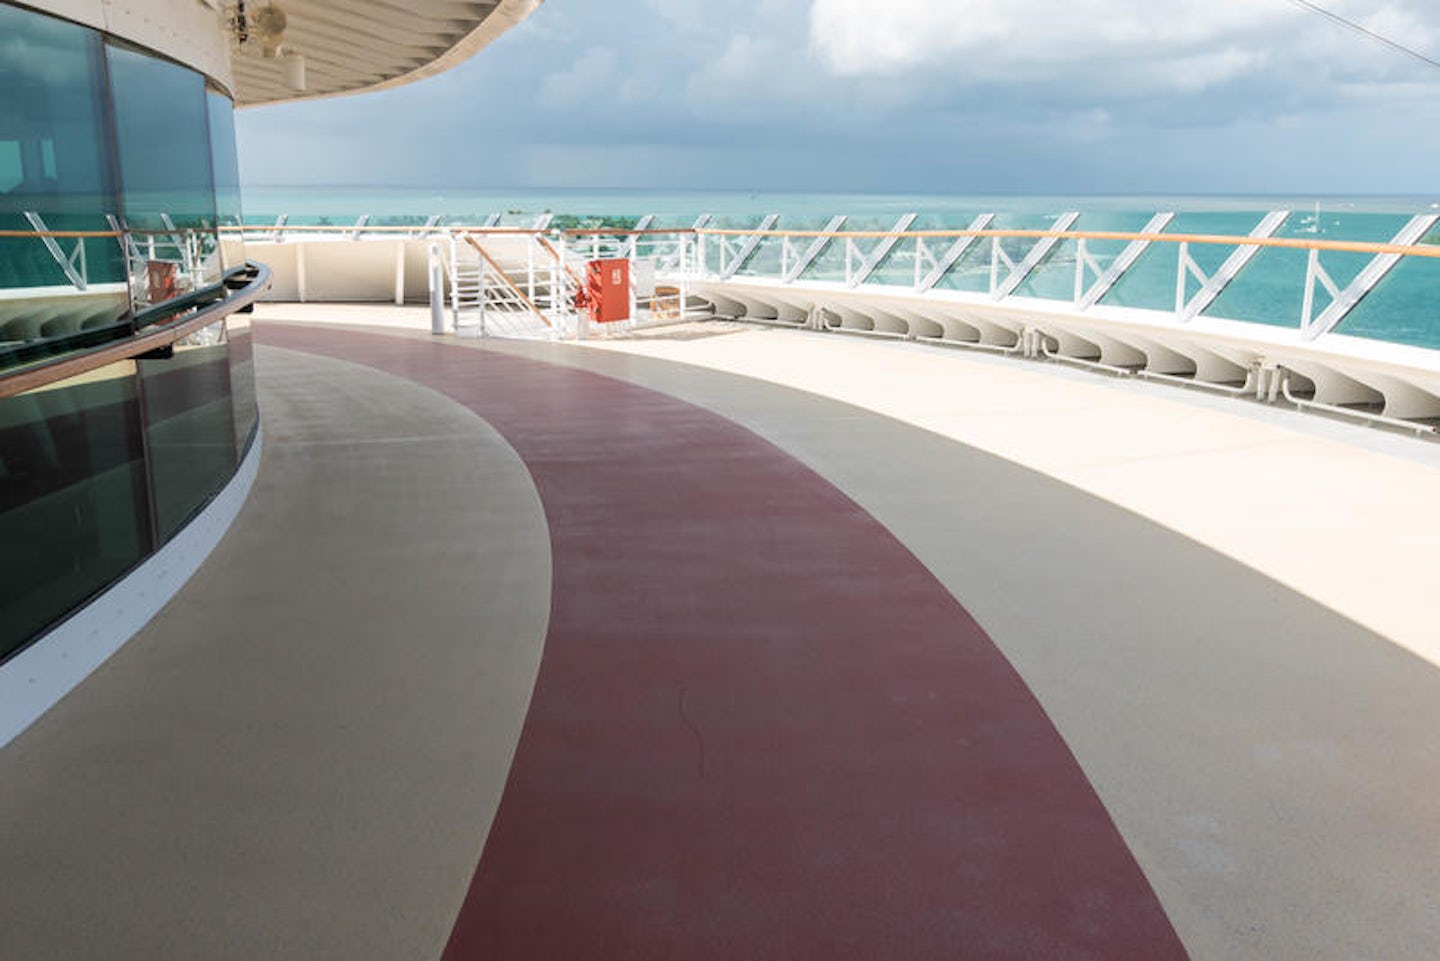 Jogging Track on Brilliance of the Seas